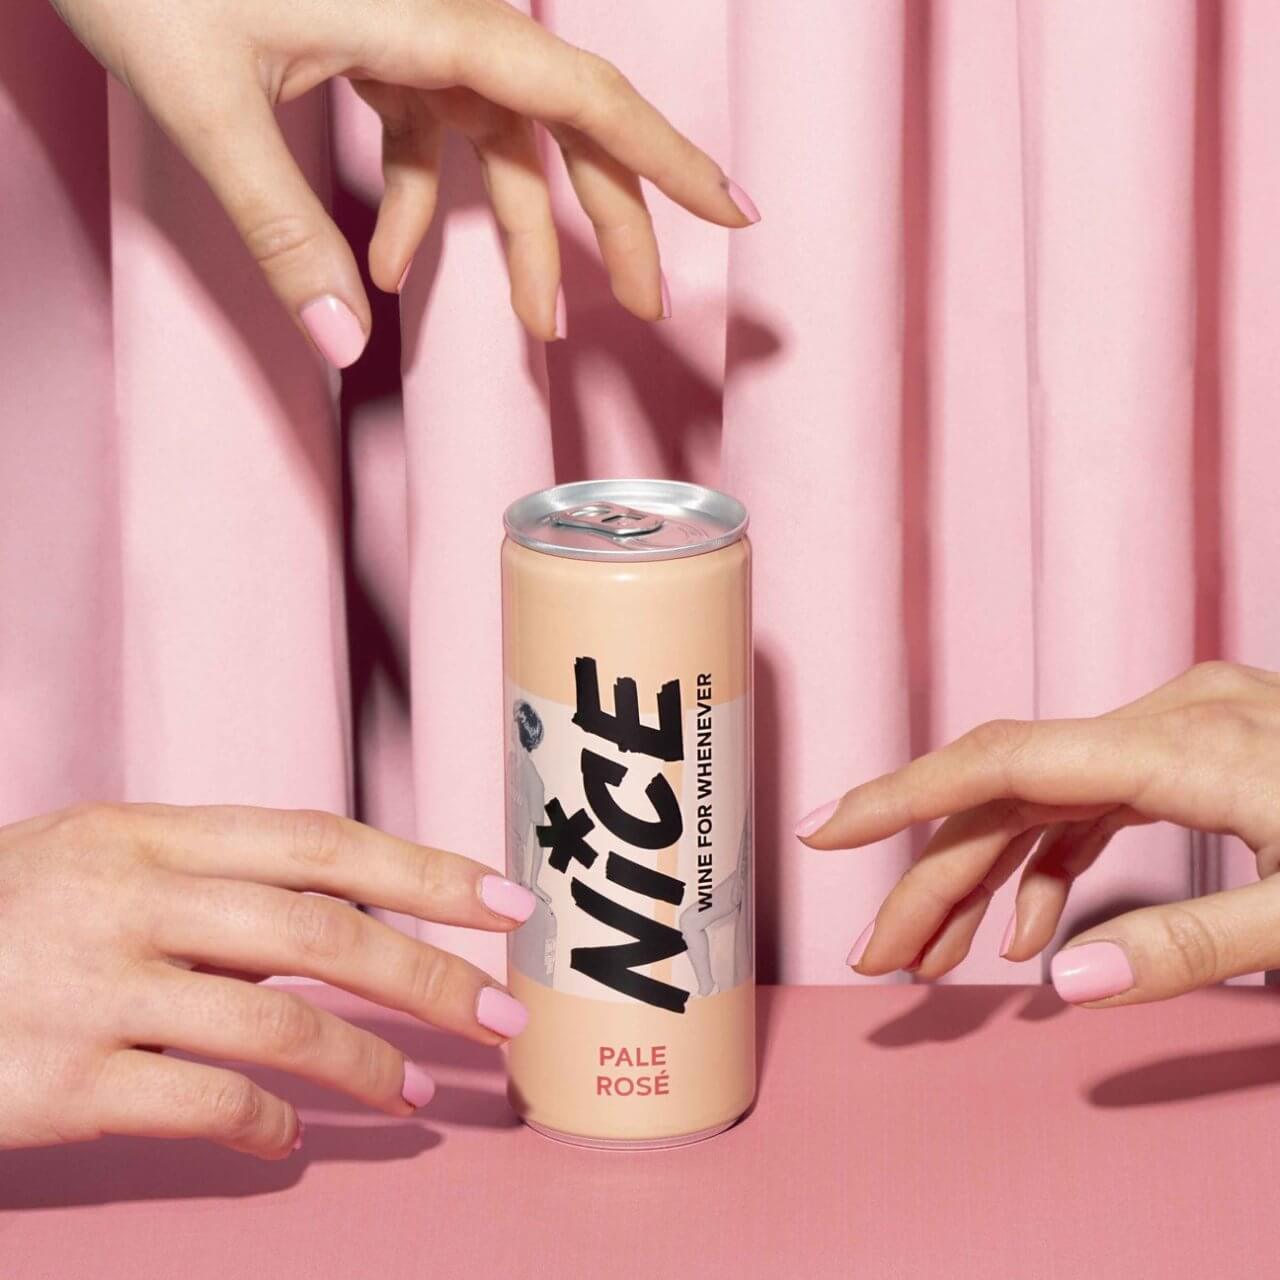 Wine o’clock however you want: The new visual language of canned wines